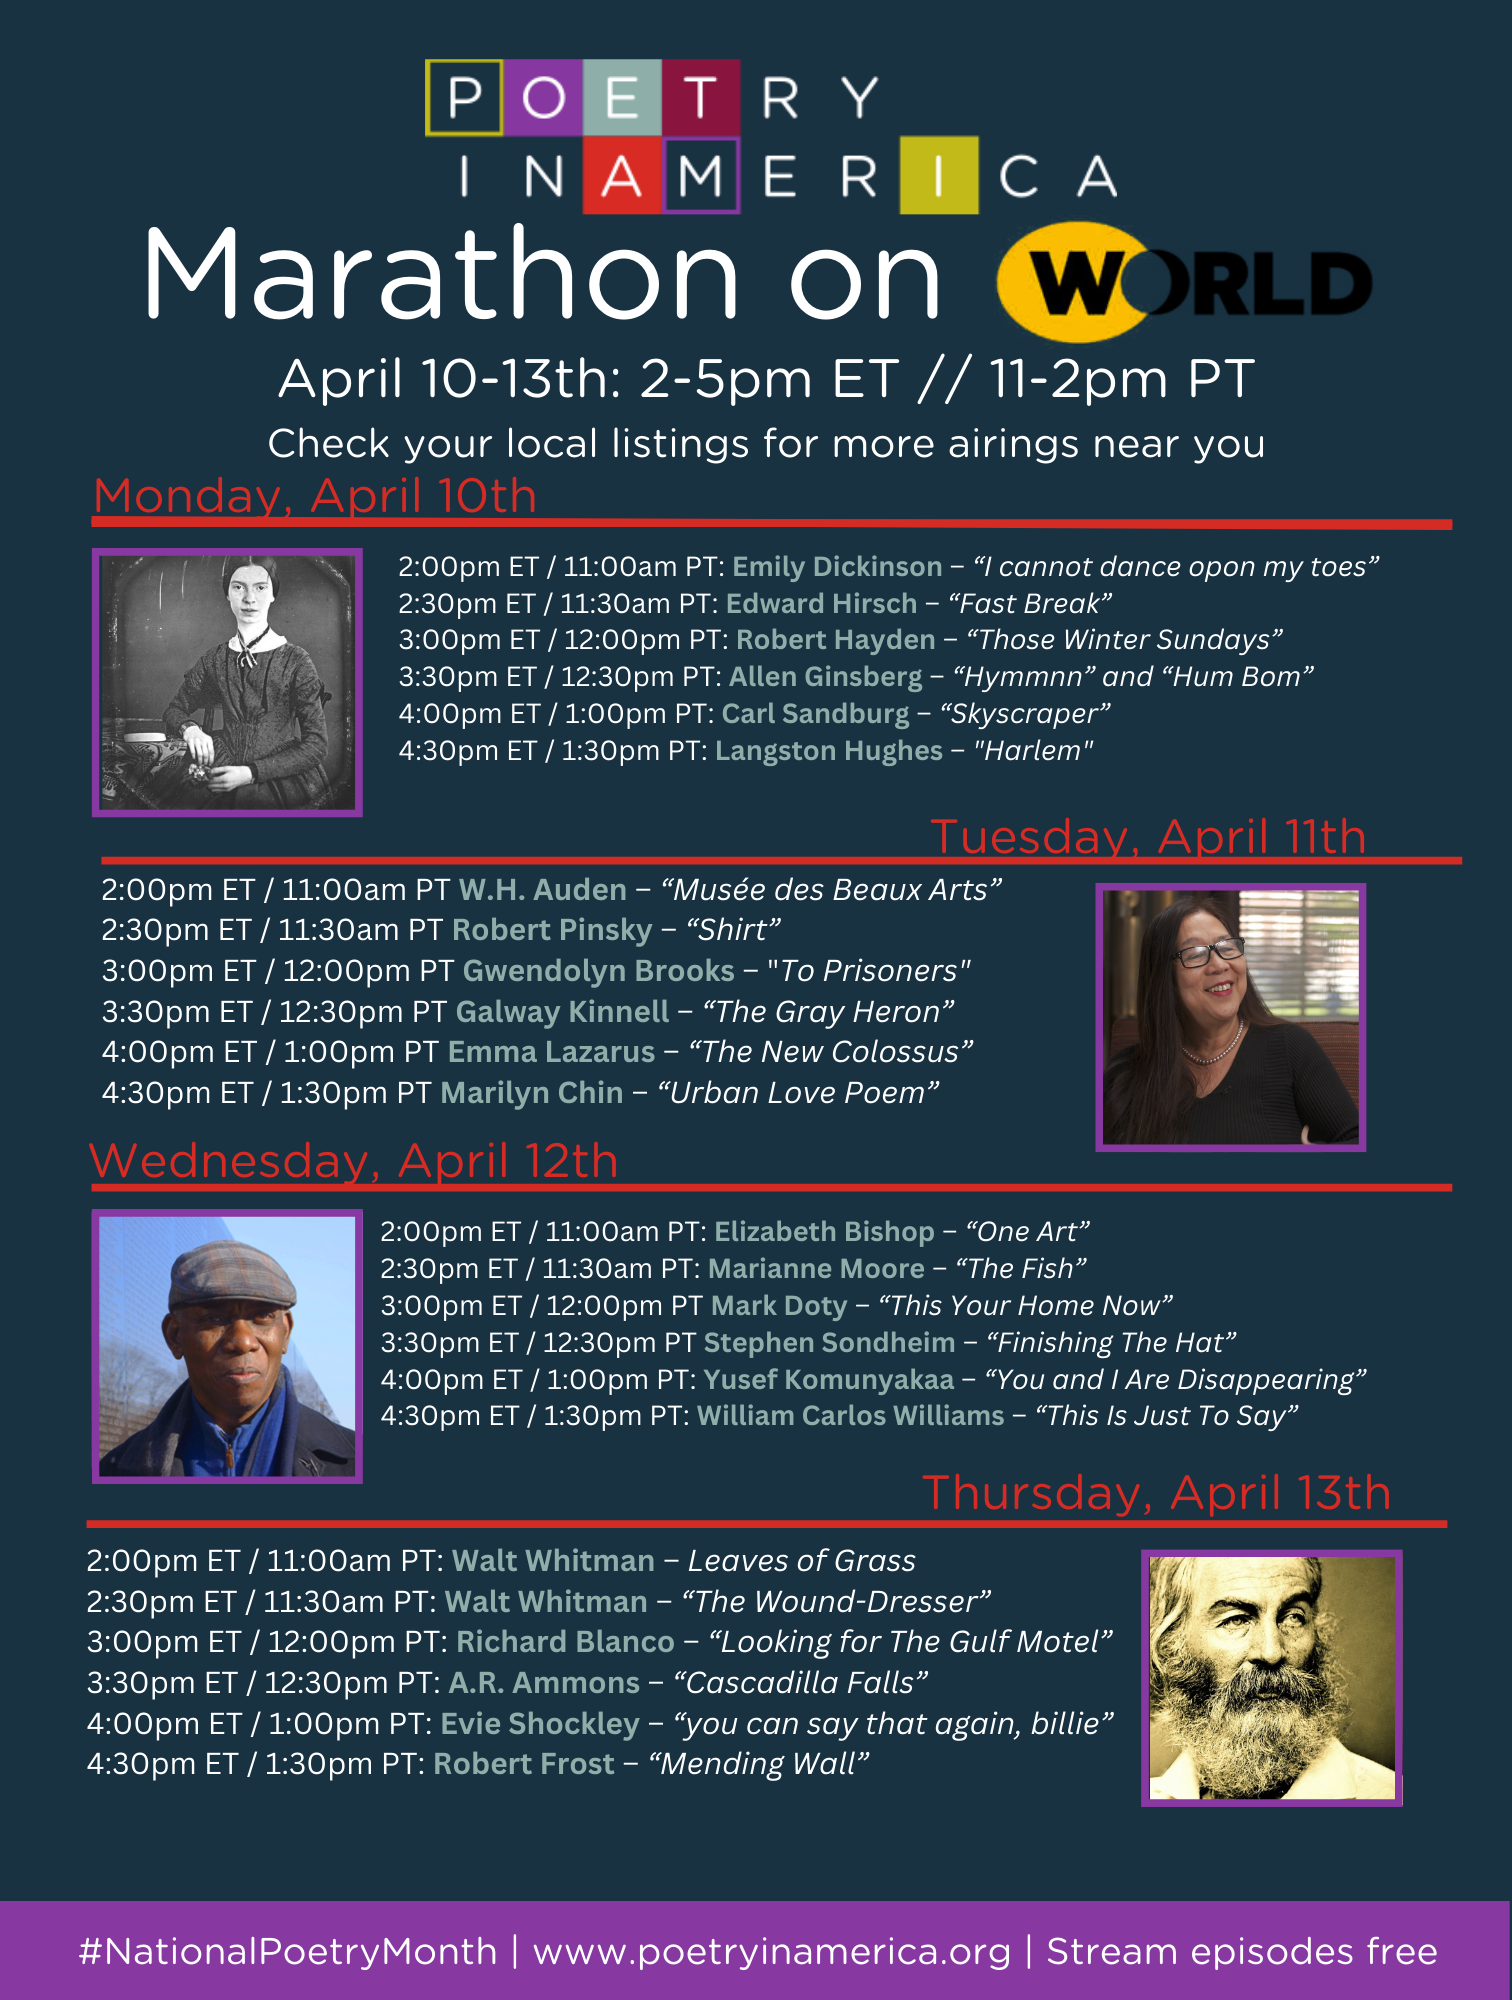 Full schedule for the marathon, including the featured poems that are airing on April 10th, 11th, 12th, and 13th.